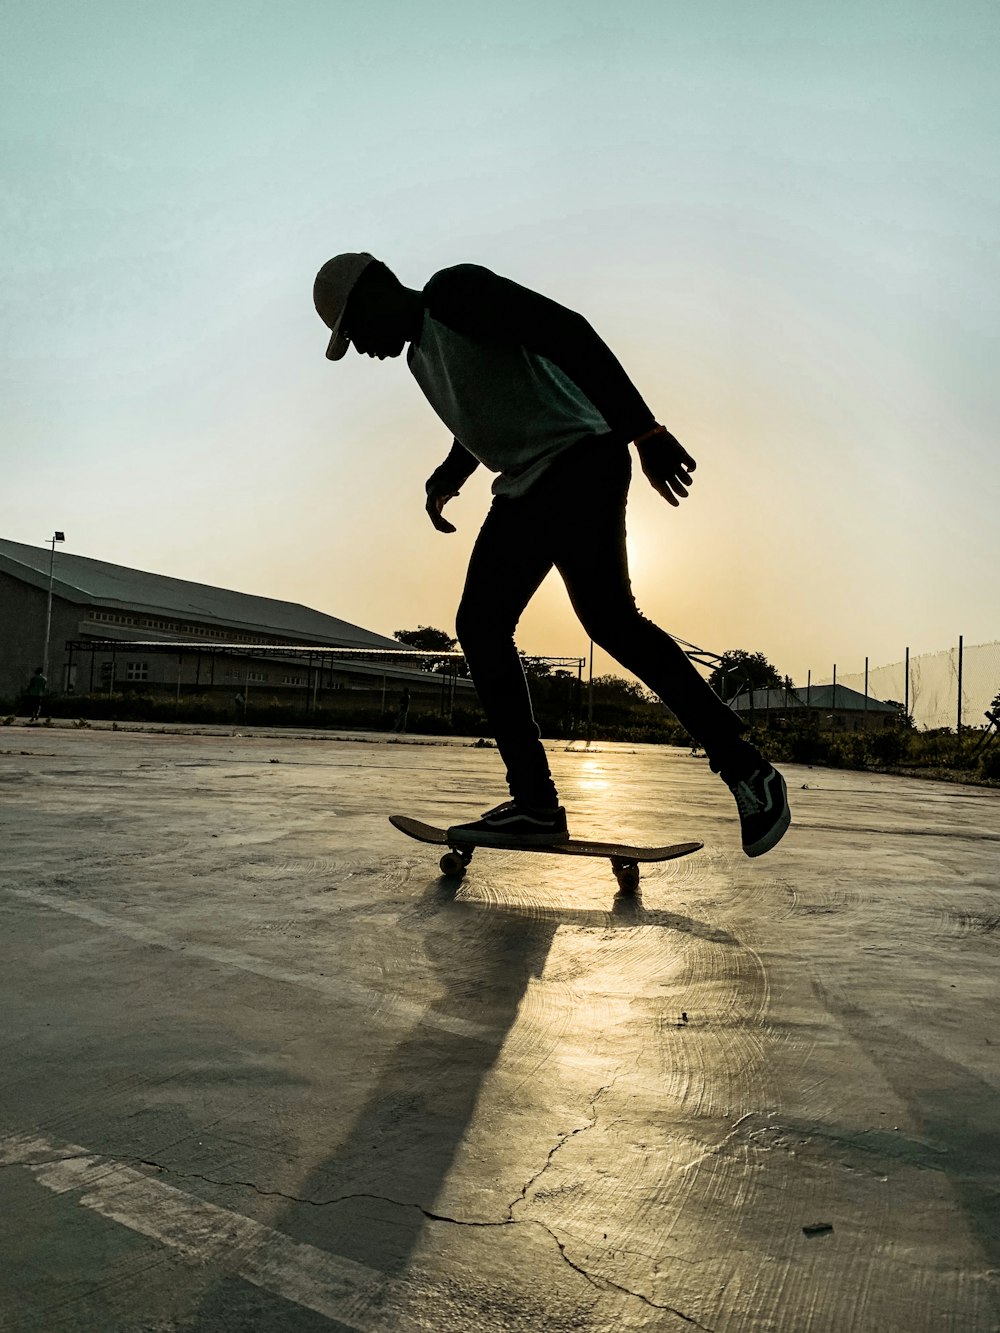 man skateboarding on cemented vacant lot during sunset